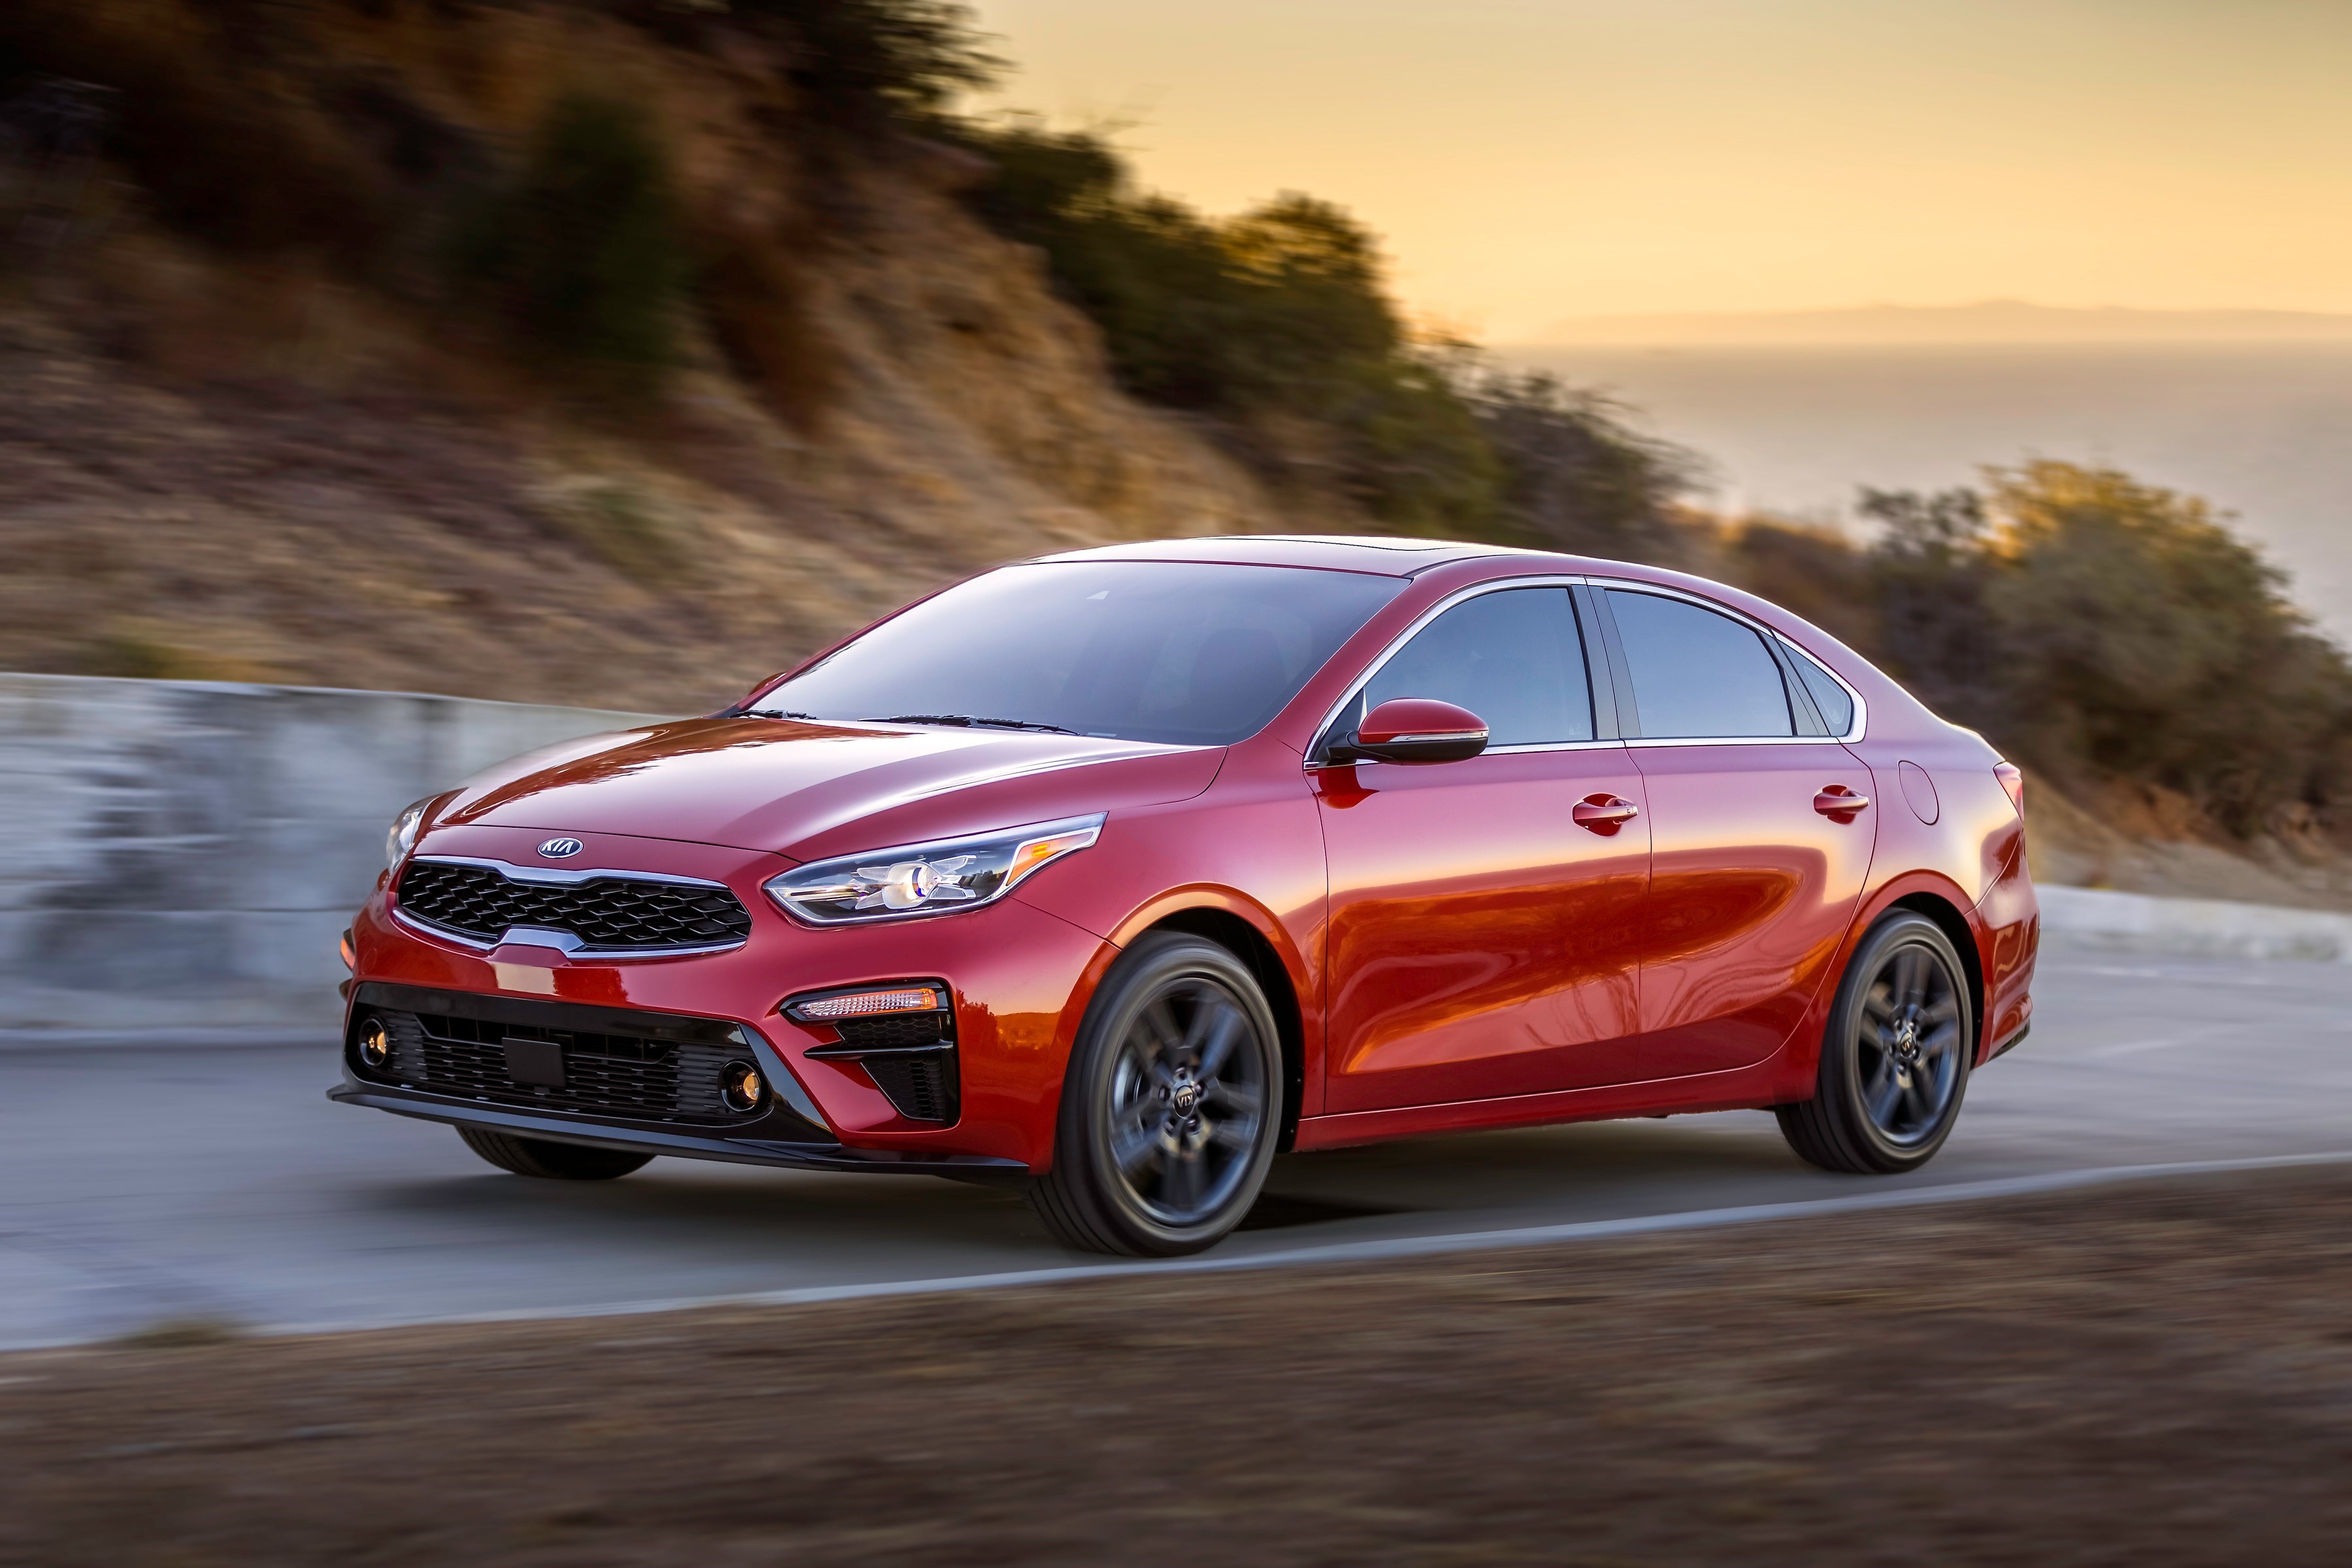 2019 Kia Forte Review: Remarkable Value in a Stylish Package - TFLcar